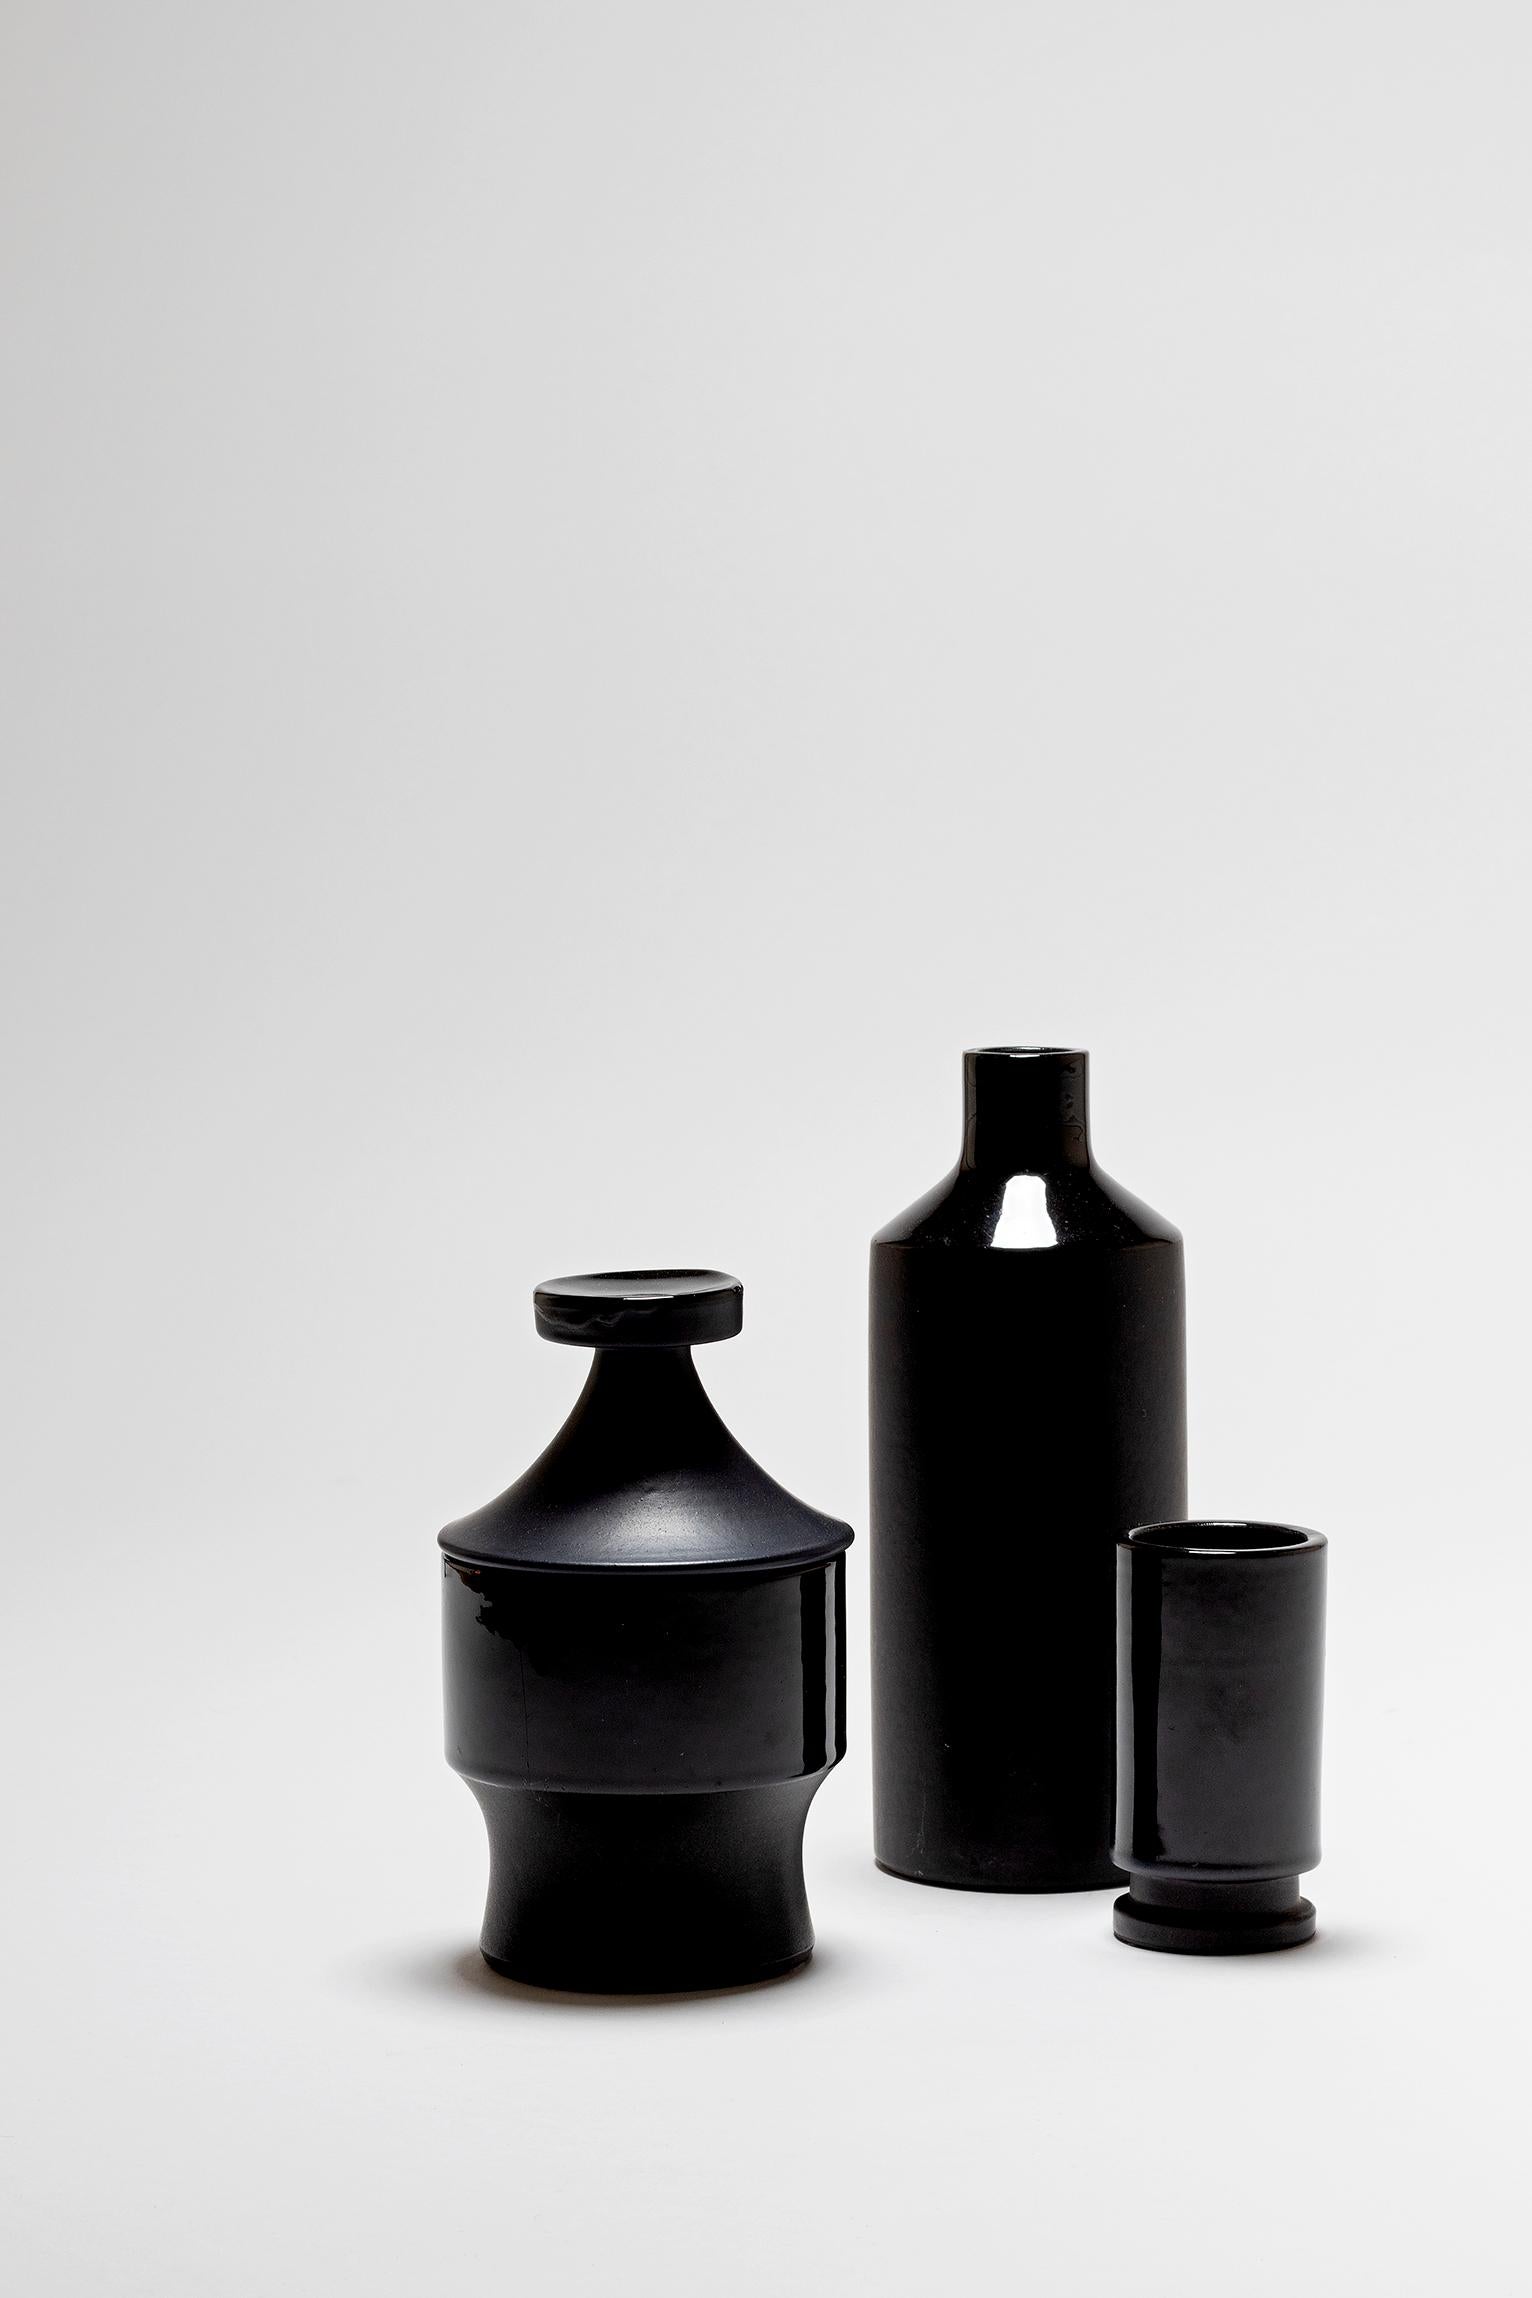 A set of three black ceramic vessels, by Lucerner Keramik
Switzerland, Lucerne, 1950s
Stamped with the maker's mark and inventory number
Bottle: 21 cm tall 
Lidded box: 17 cm tall 
Smaller vase: 10 cm tall.